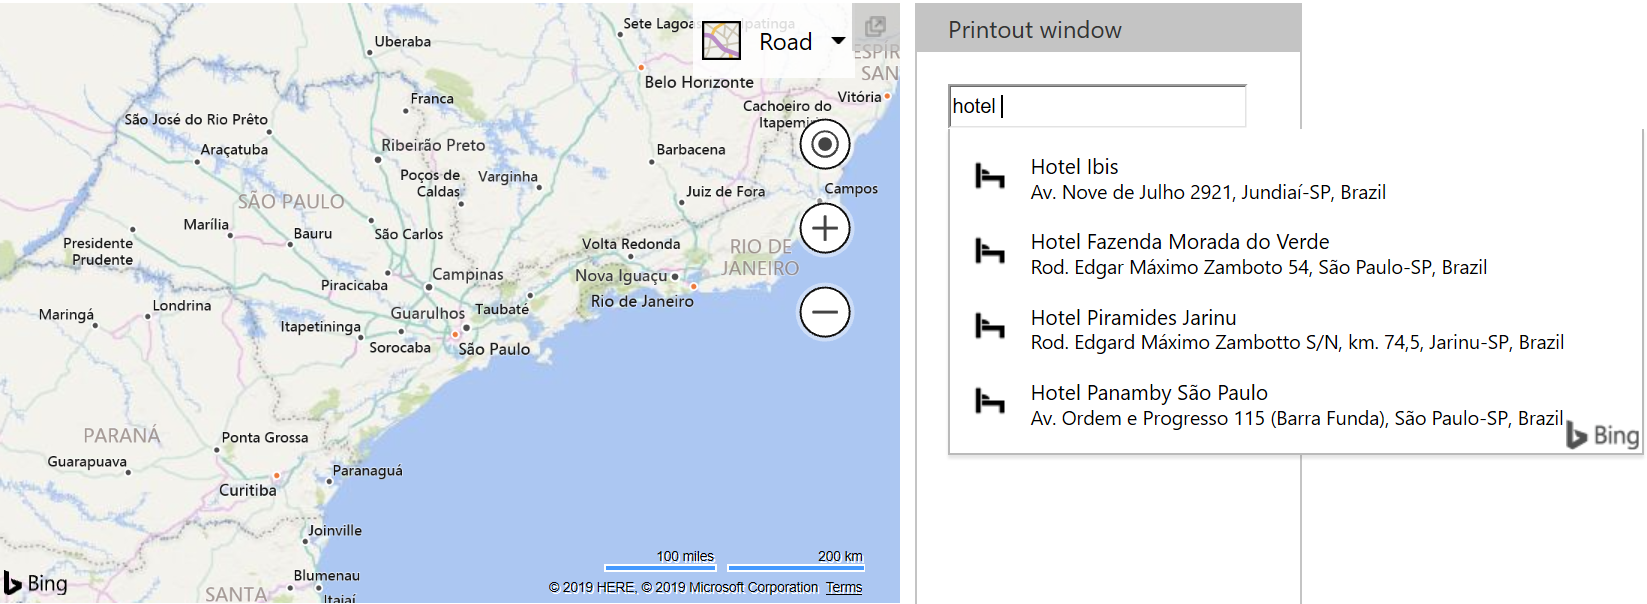 Bing Maps Autosuggest Api Now Supports Business Suggestions In 8 New Countries Maps Blog